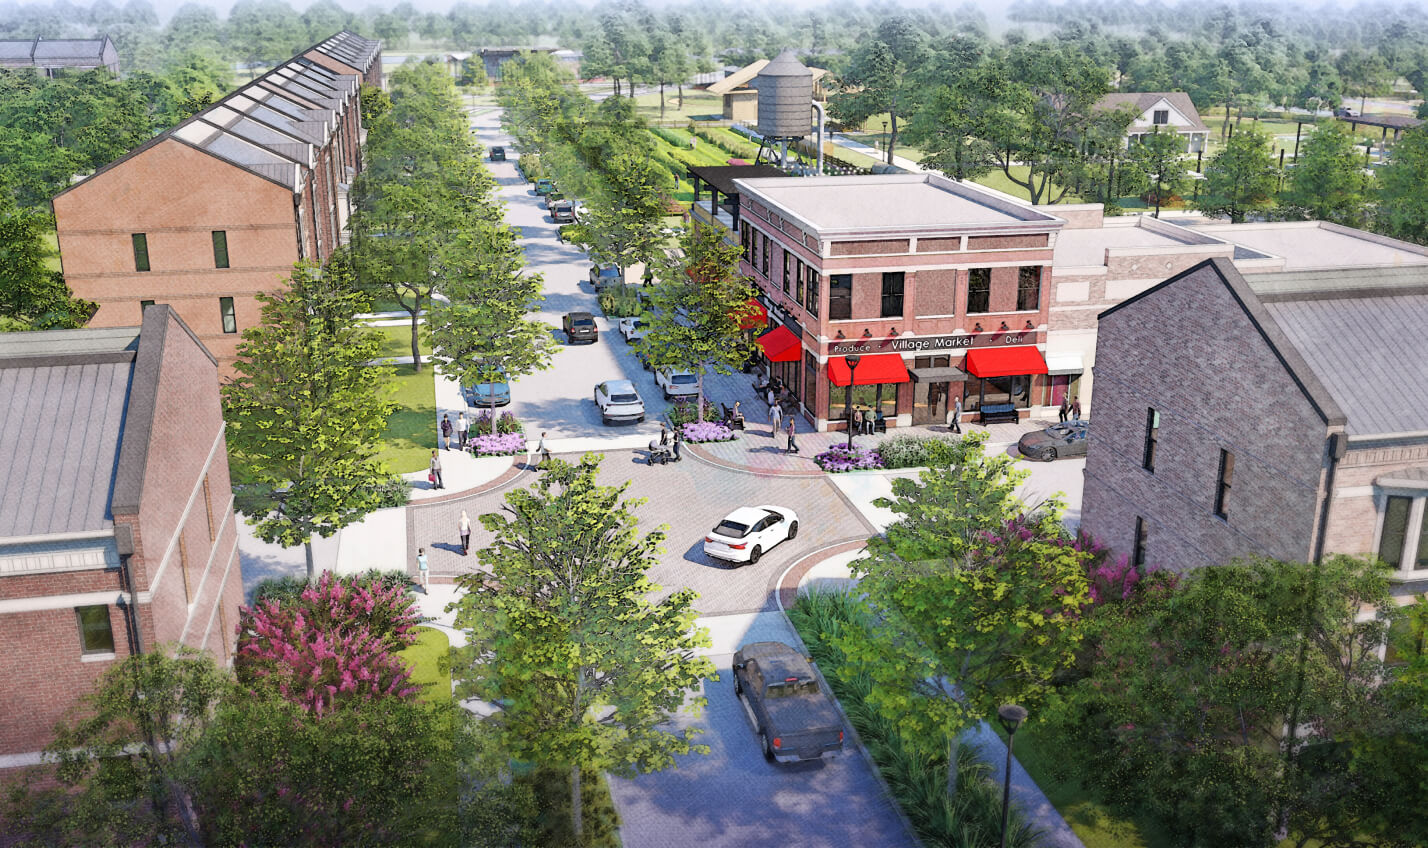 An artistic rendering of a proposed urban development in Goodland TX featuring modern buildings, a tree-lined street, and pedestrian areas.